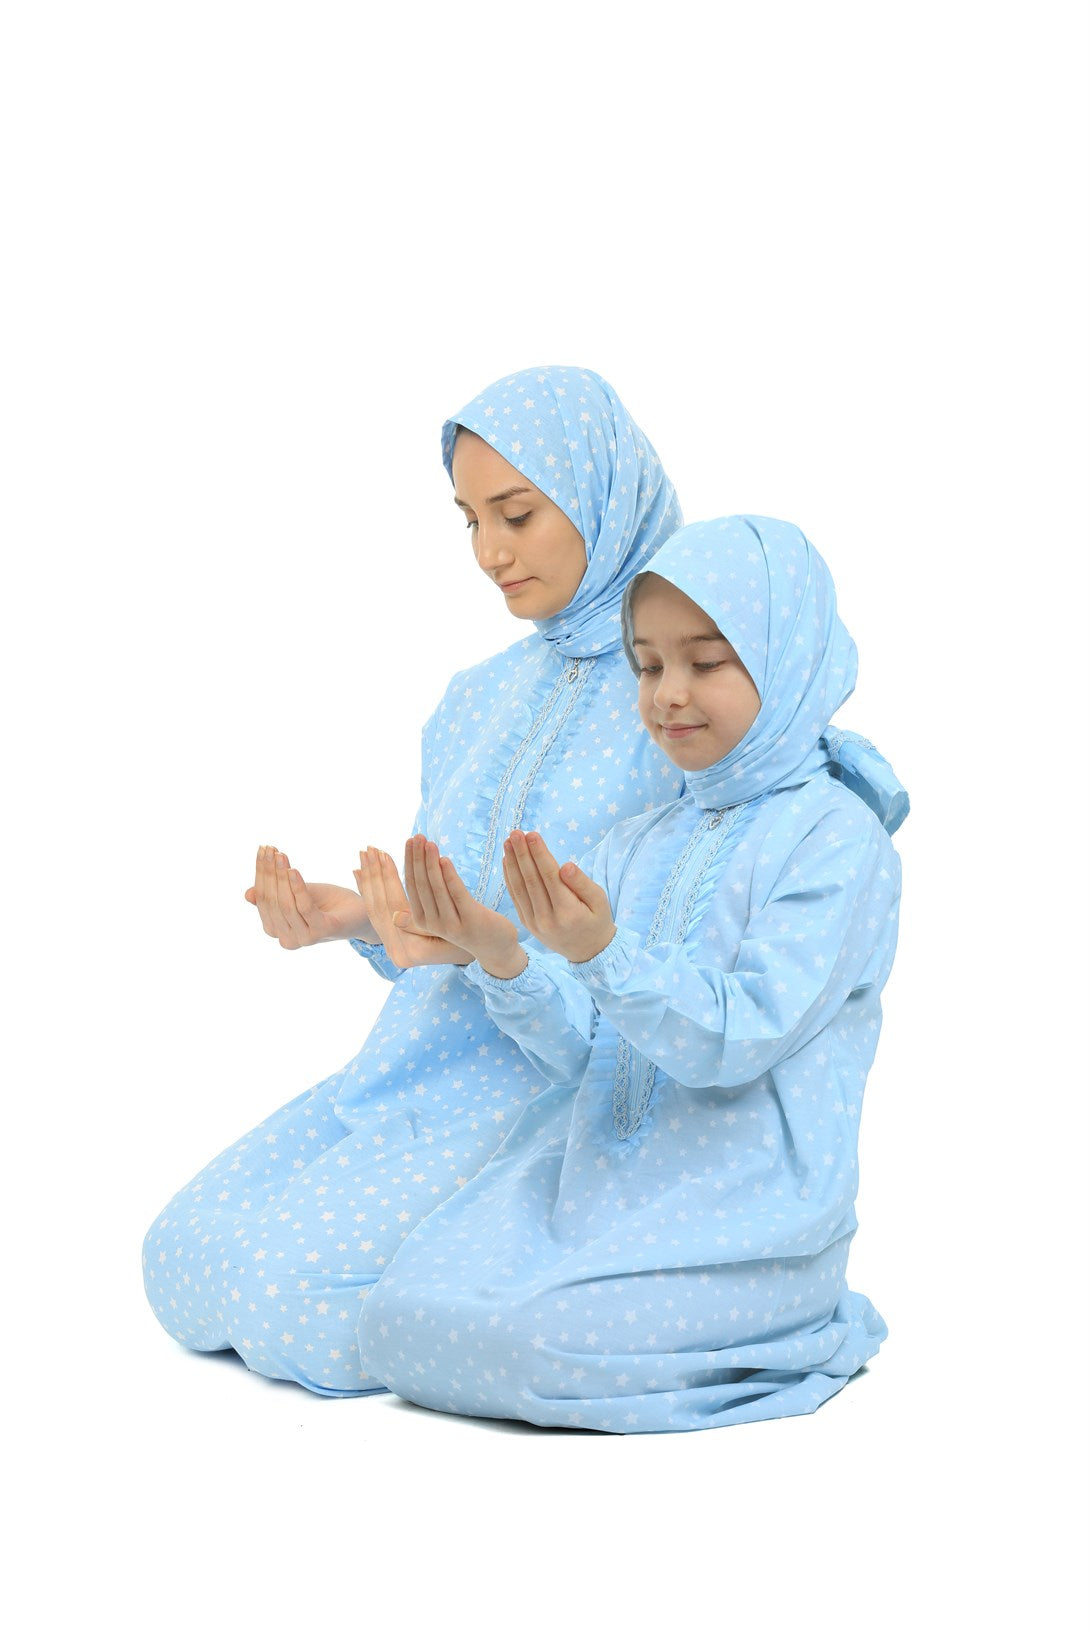 Mother Daughter Practical Prayer Dress Zippered Cotton Blue Printed Sold Separately